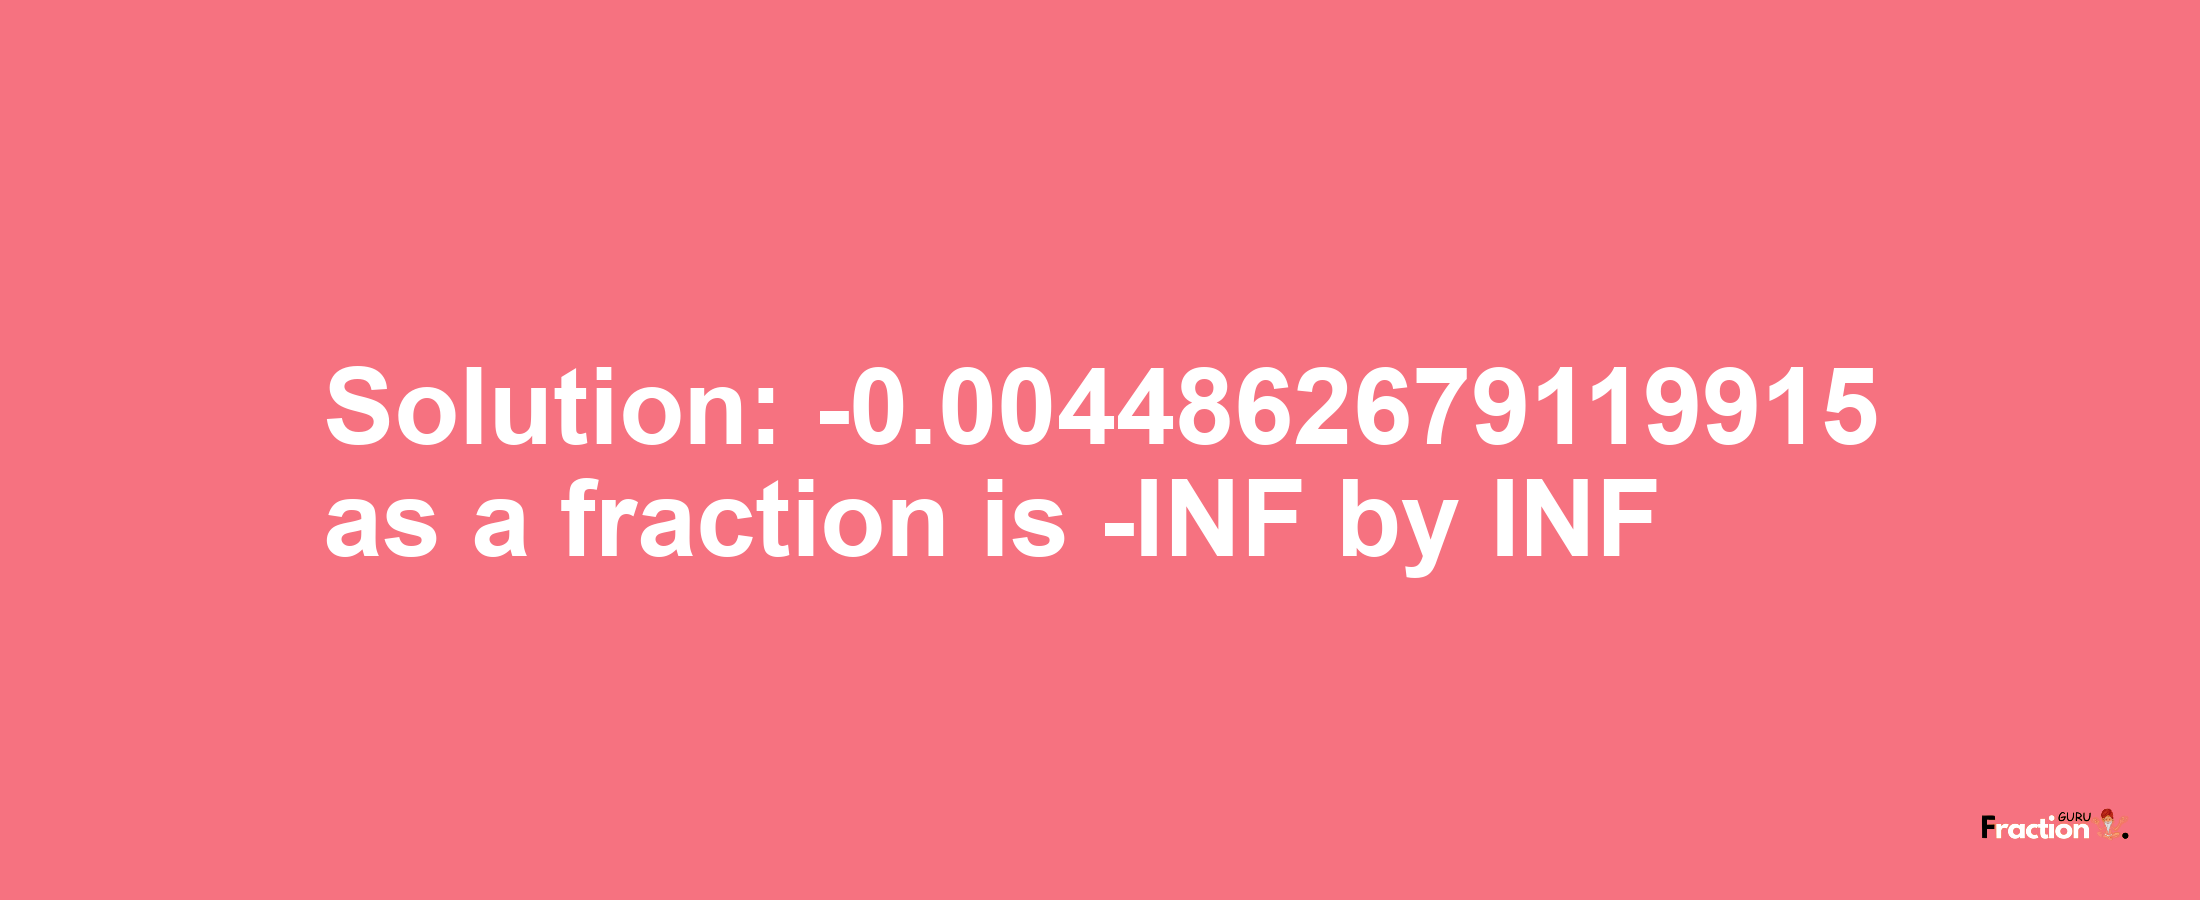 Solution:-0.0044862679119915 as a fraction is -INF/INF